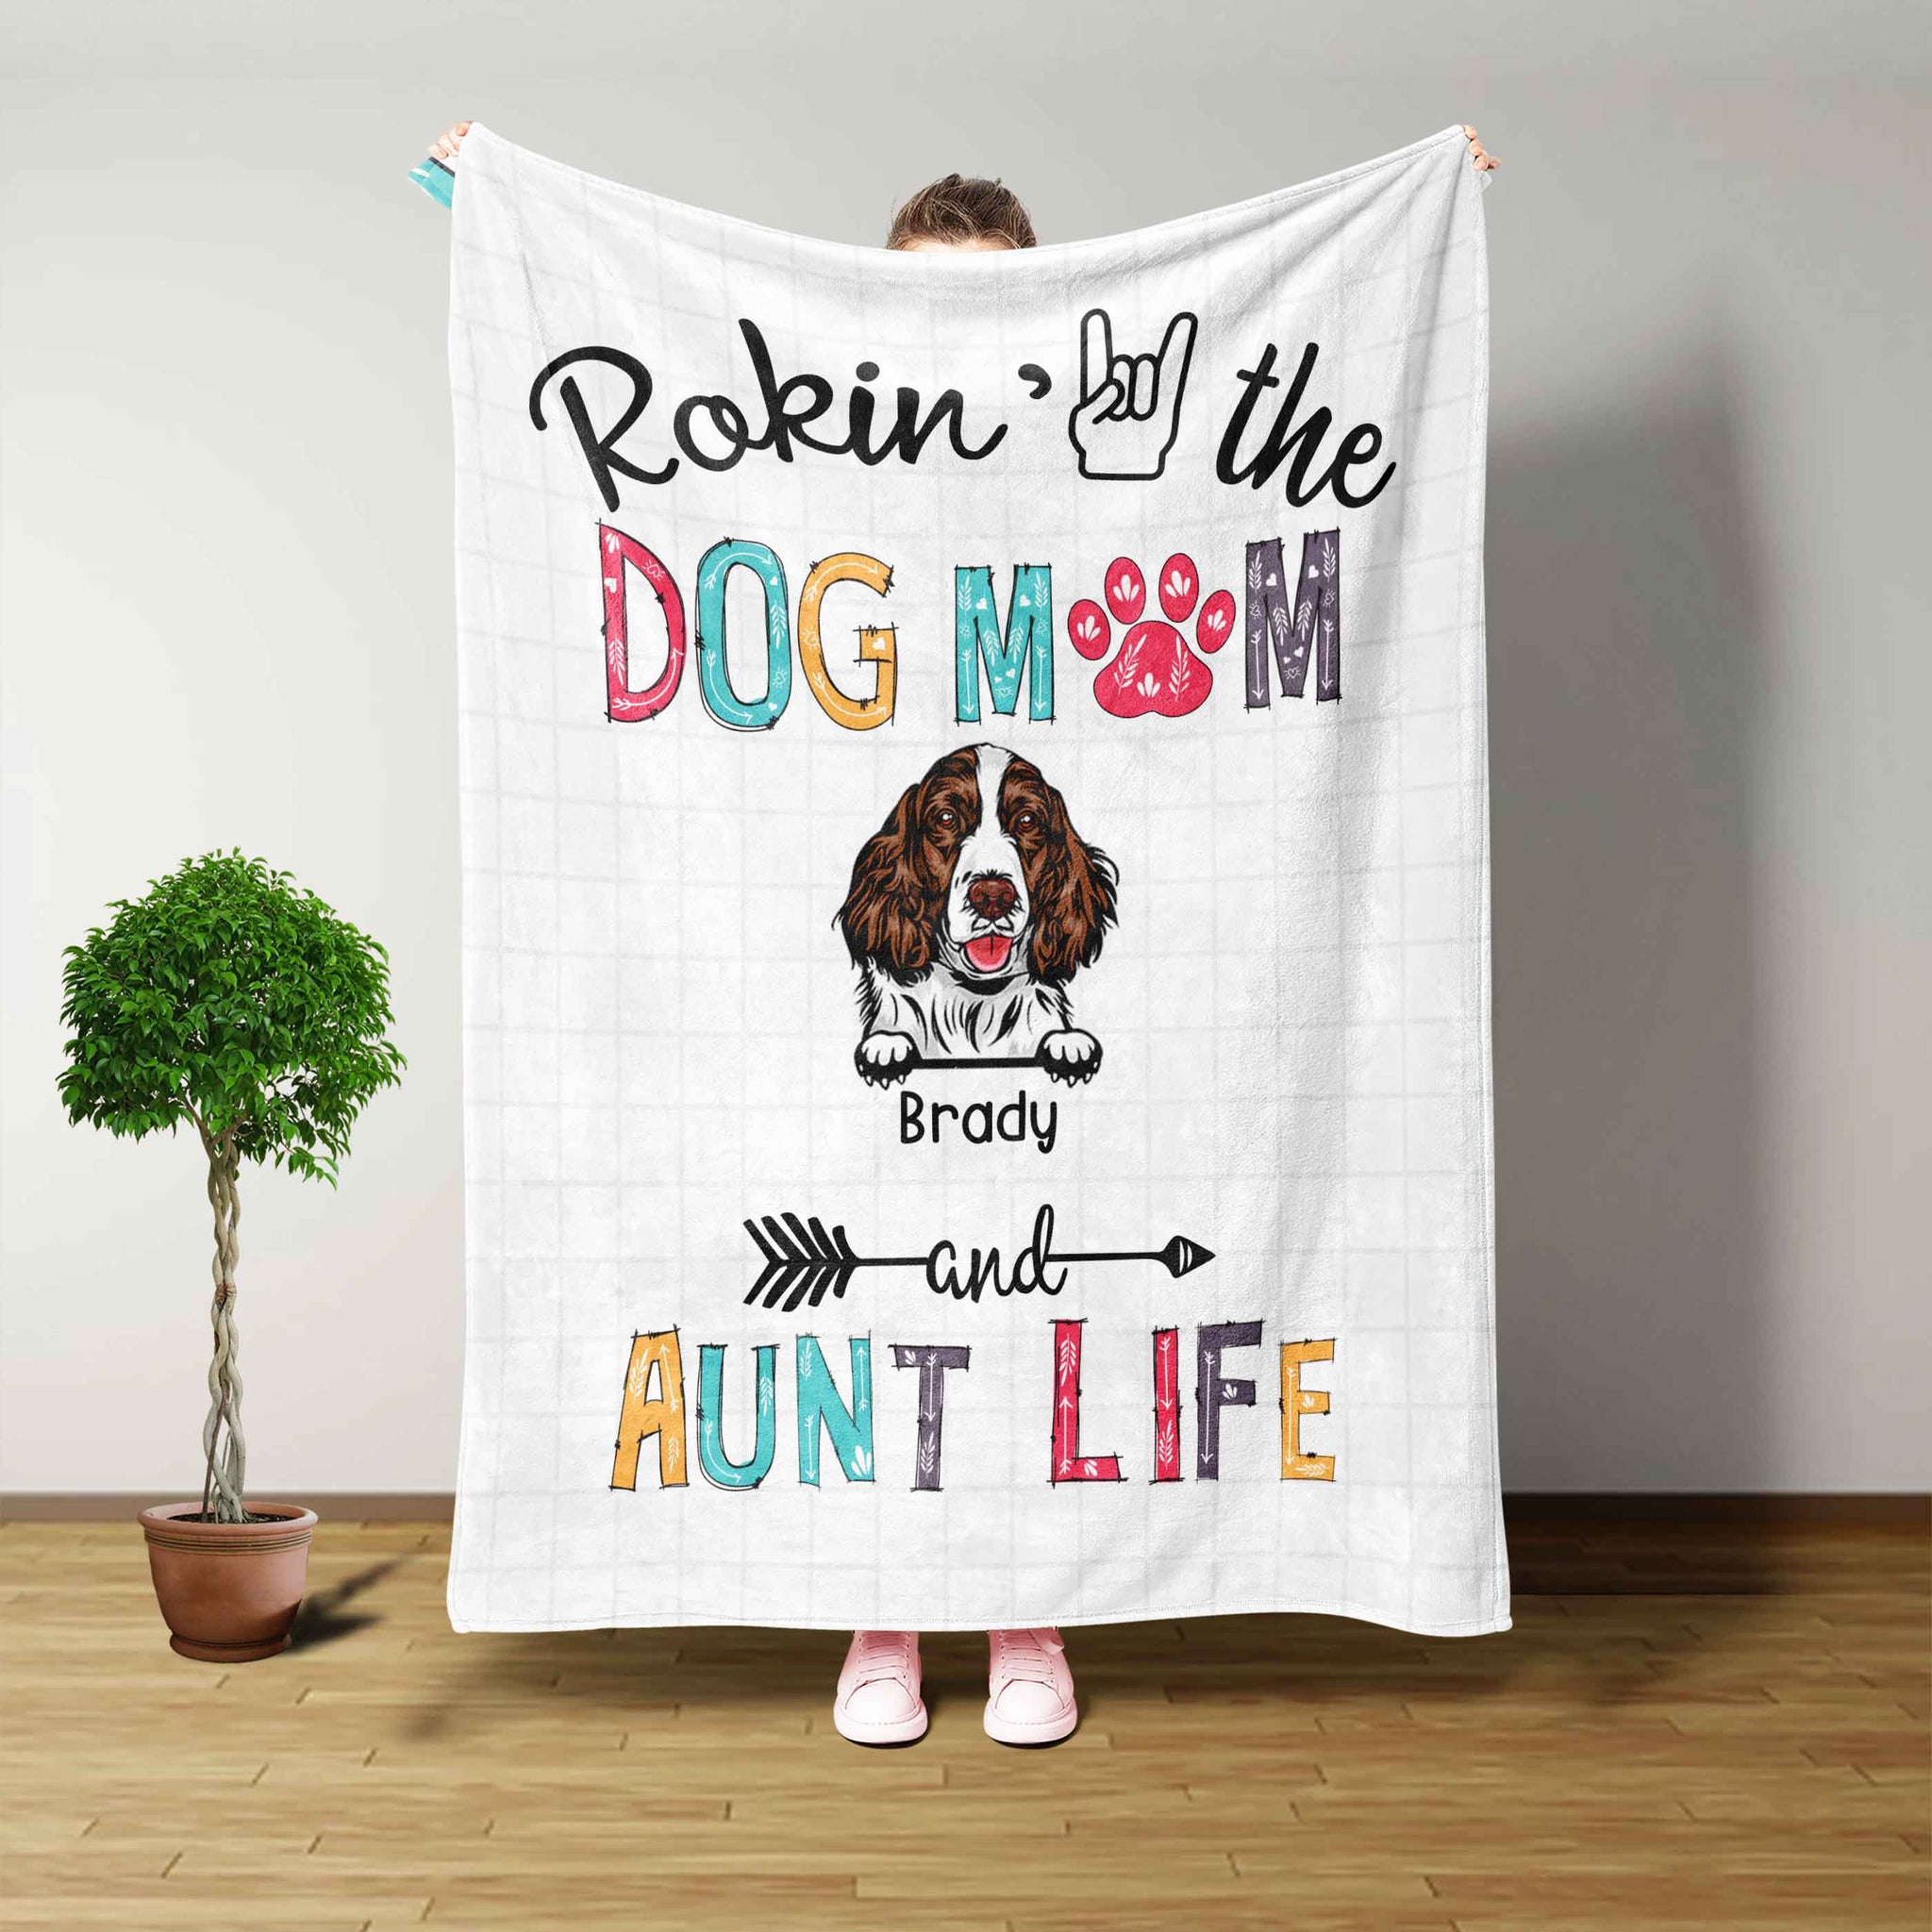 Blanket Customized, Rockin' the Dog Mom and Aunt Life Blanket, Gifts For Dog Mom, Dog Blanket, Gifts For Women, Throw Blanket